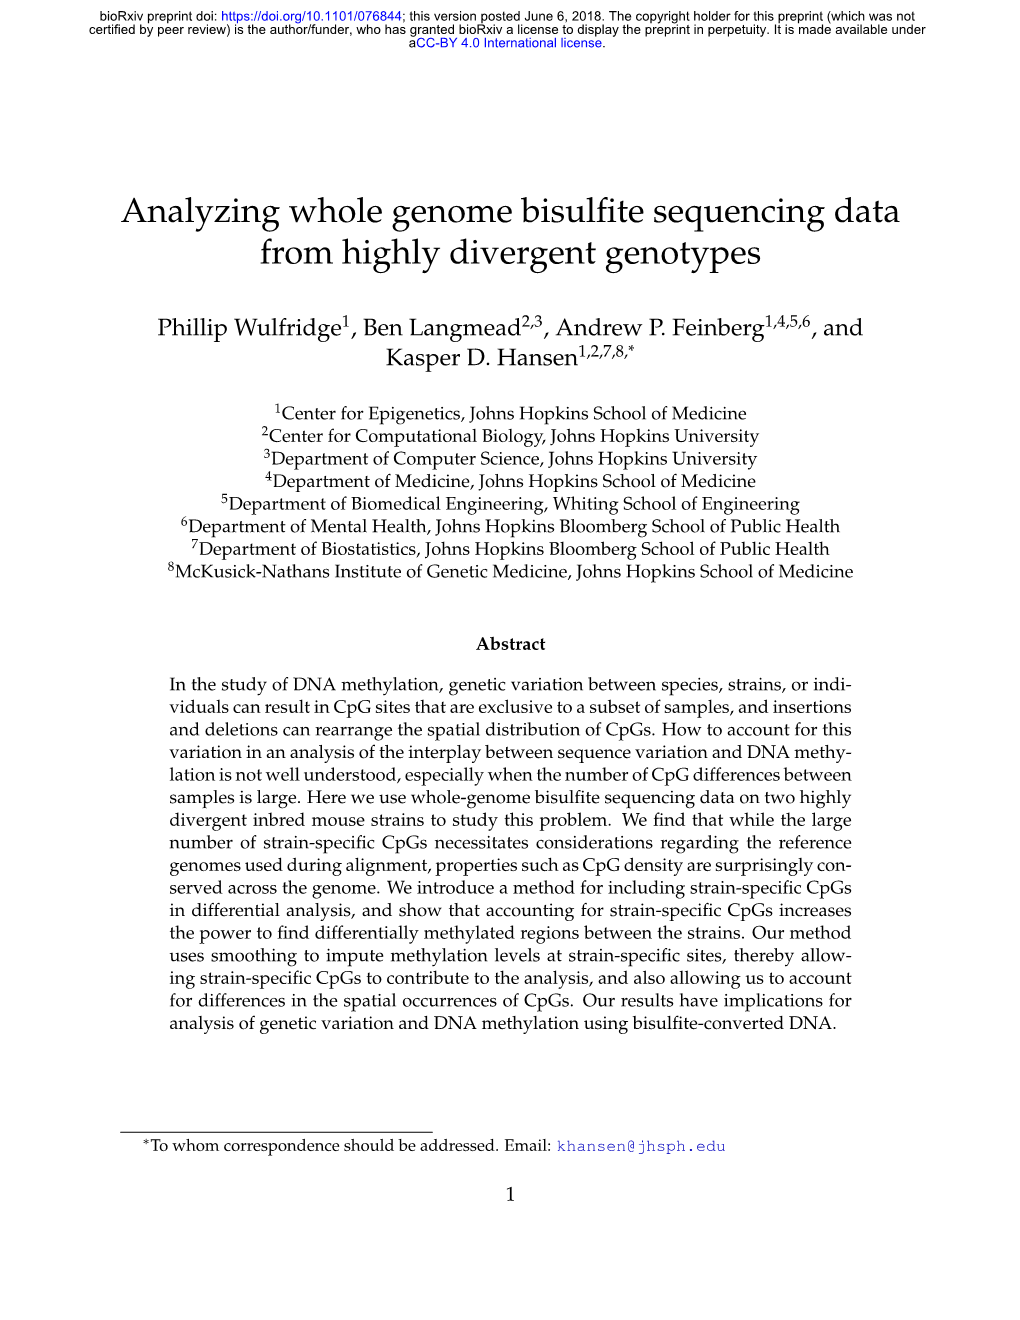 Analyzing Whole Genome Bisulfite Sequencing Data from Highly Divergent Genotypes